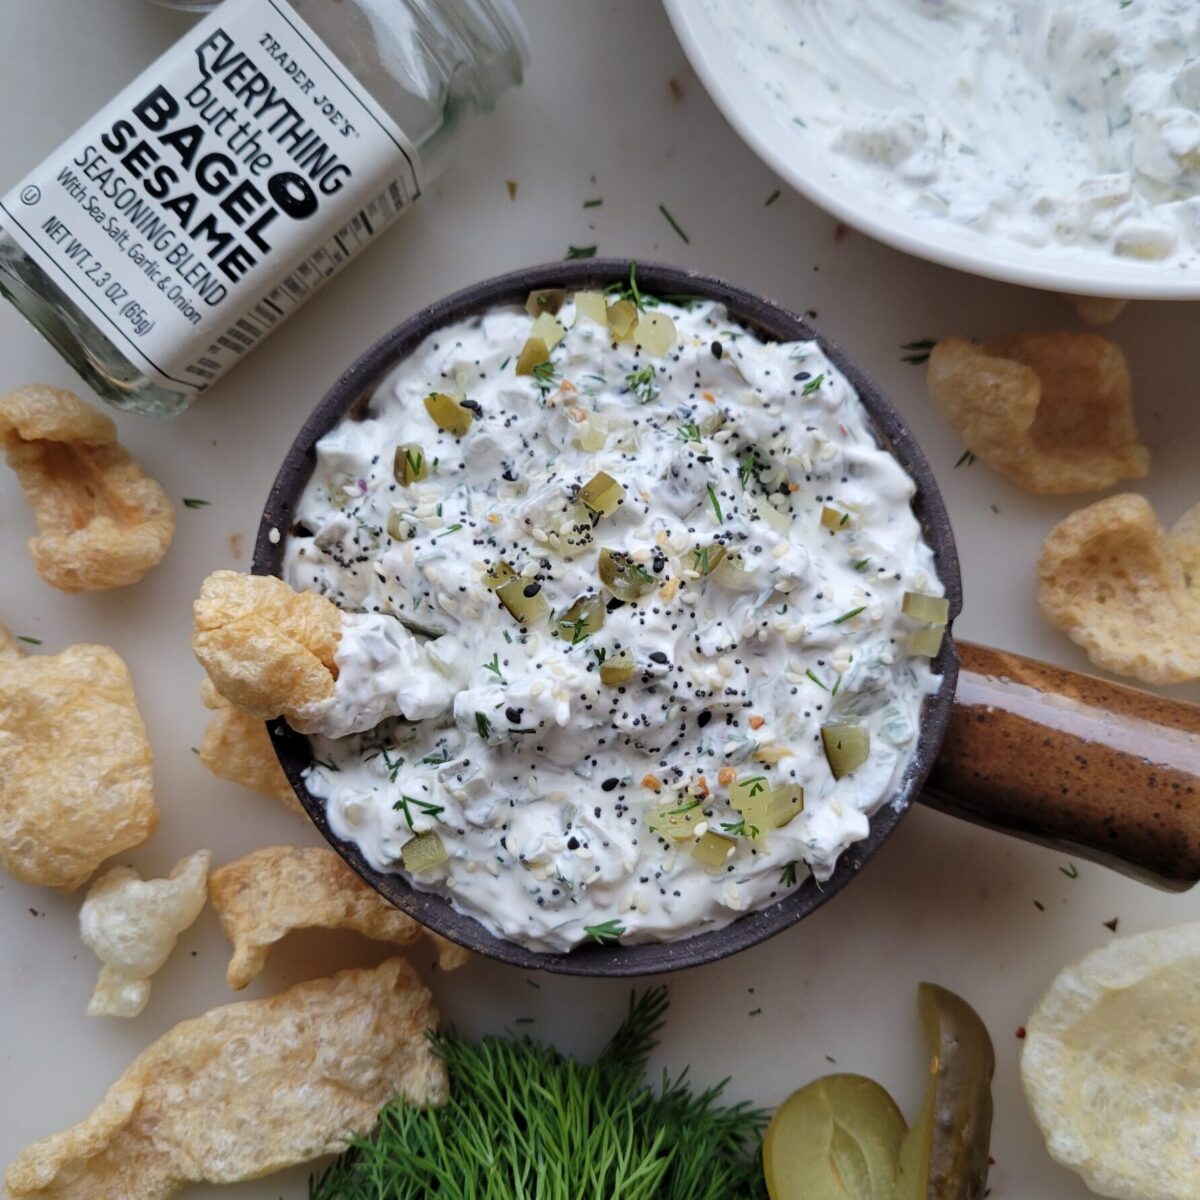 A bowl of Dill Pickle Dip with Jalapeno Pepper in on the counter surrounded by chips and Bagel Sesame Seasoning/